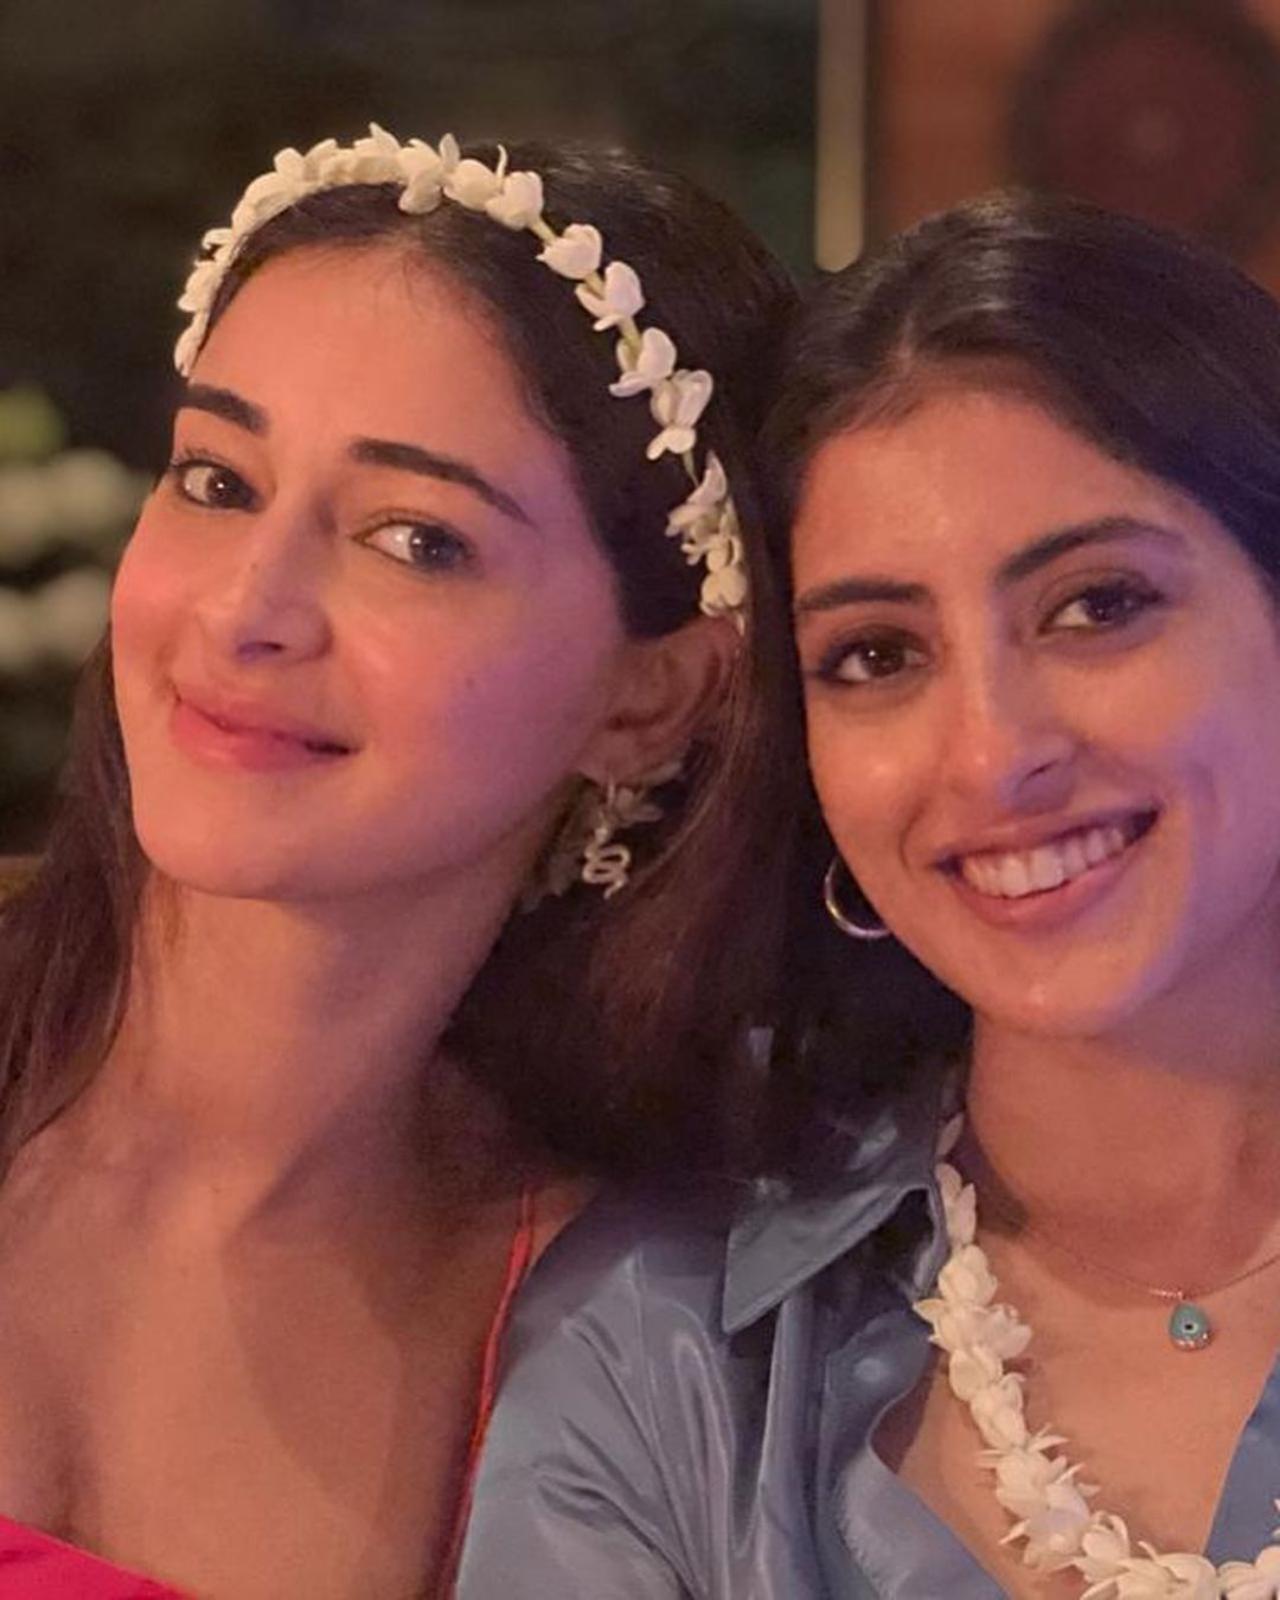 Seems like she also caught up with friends during her trip. She dropped a picture with her friend Navya Nanda, the granddaughter of Amitabh Bachchan. In the picture, Ananya is seen wearing a flower tiara while Navya is sporting a flower necklace